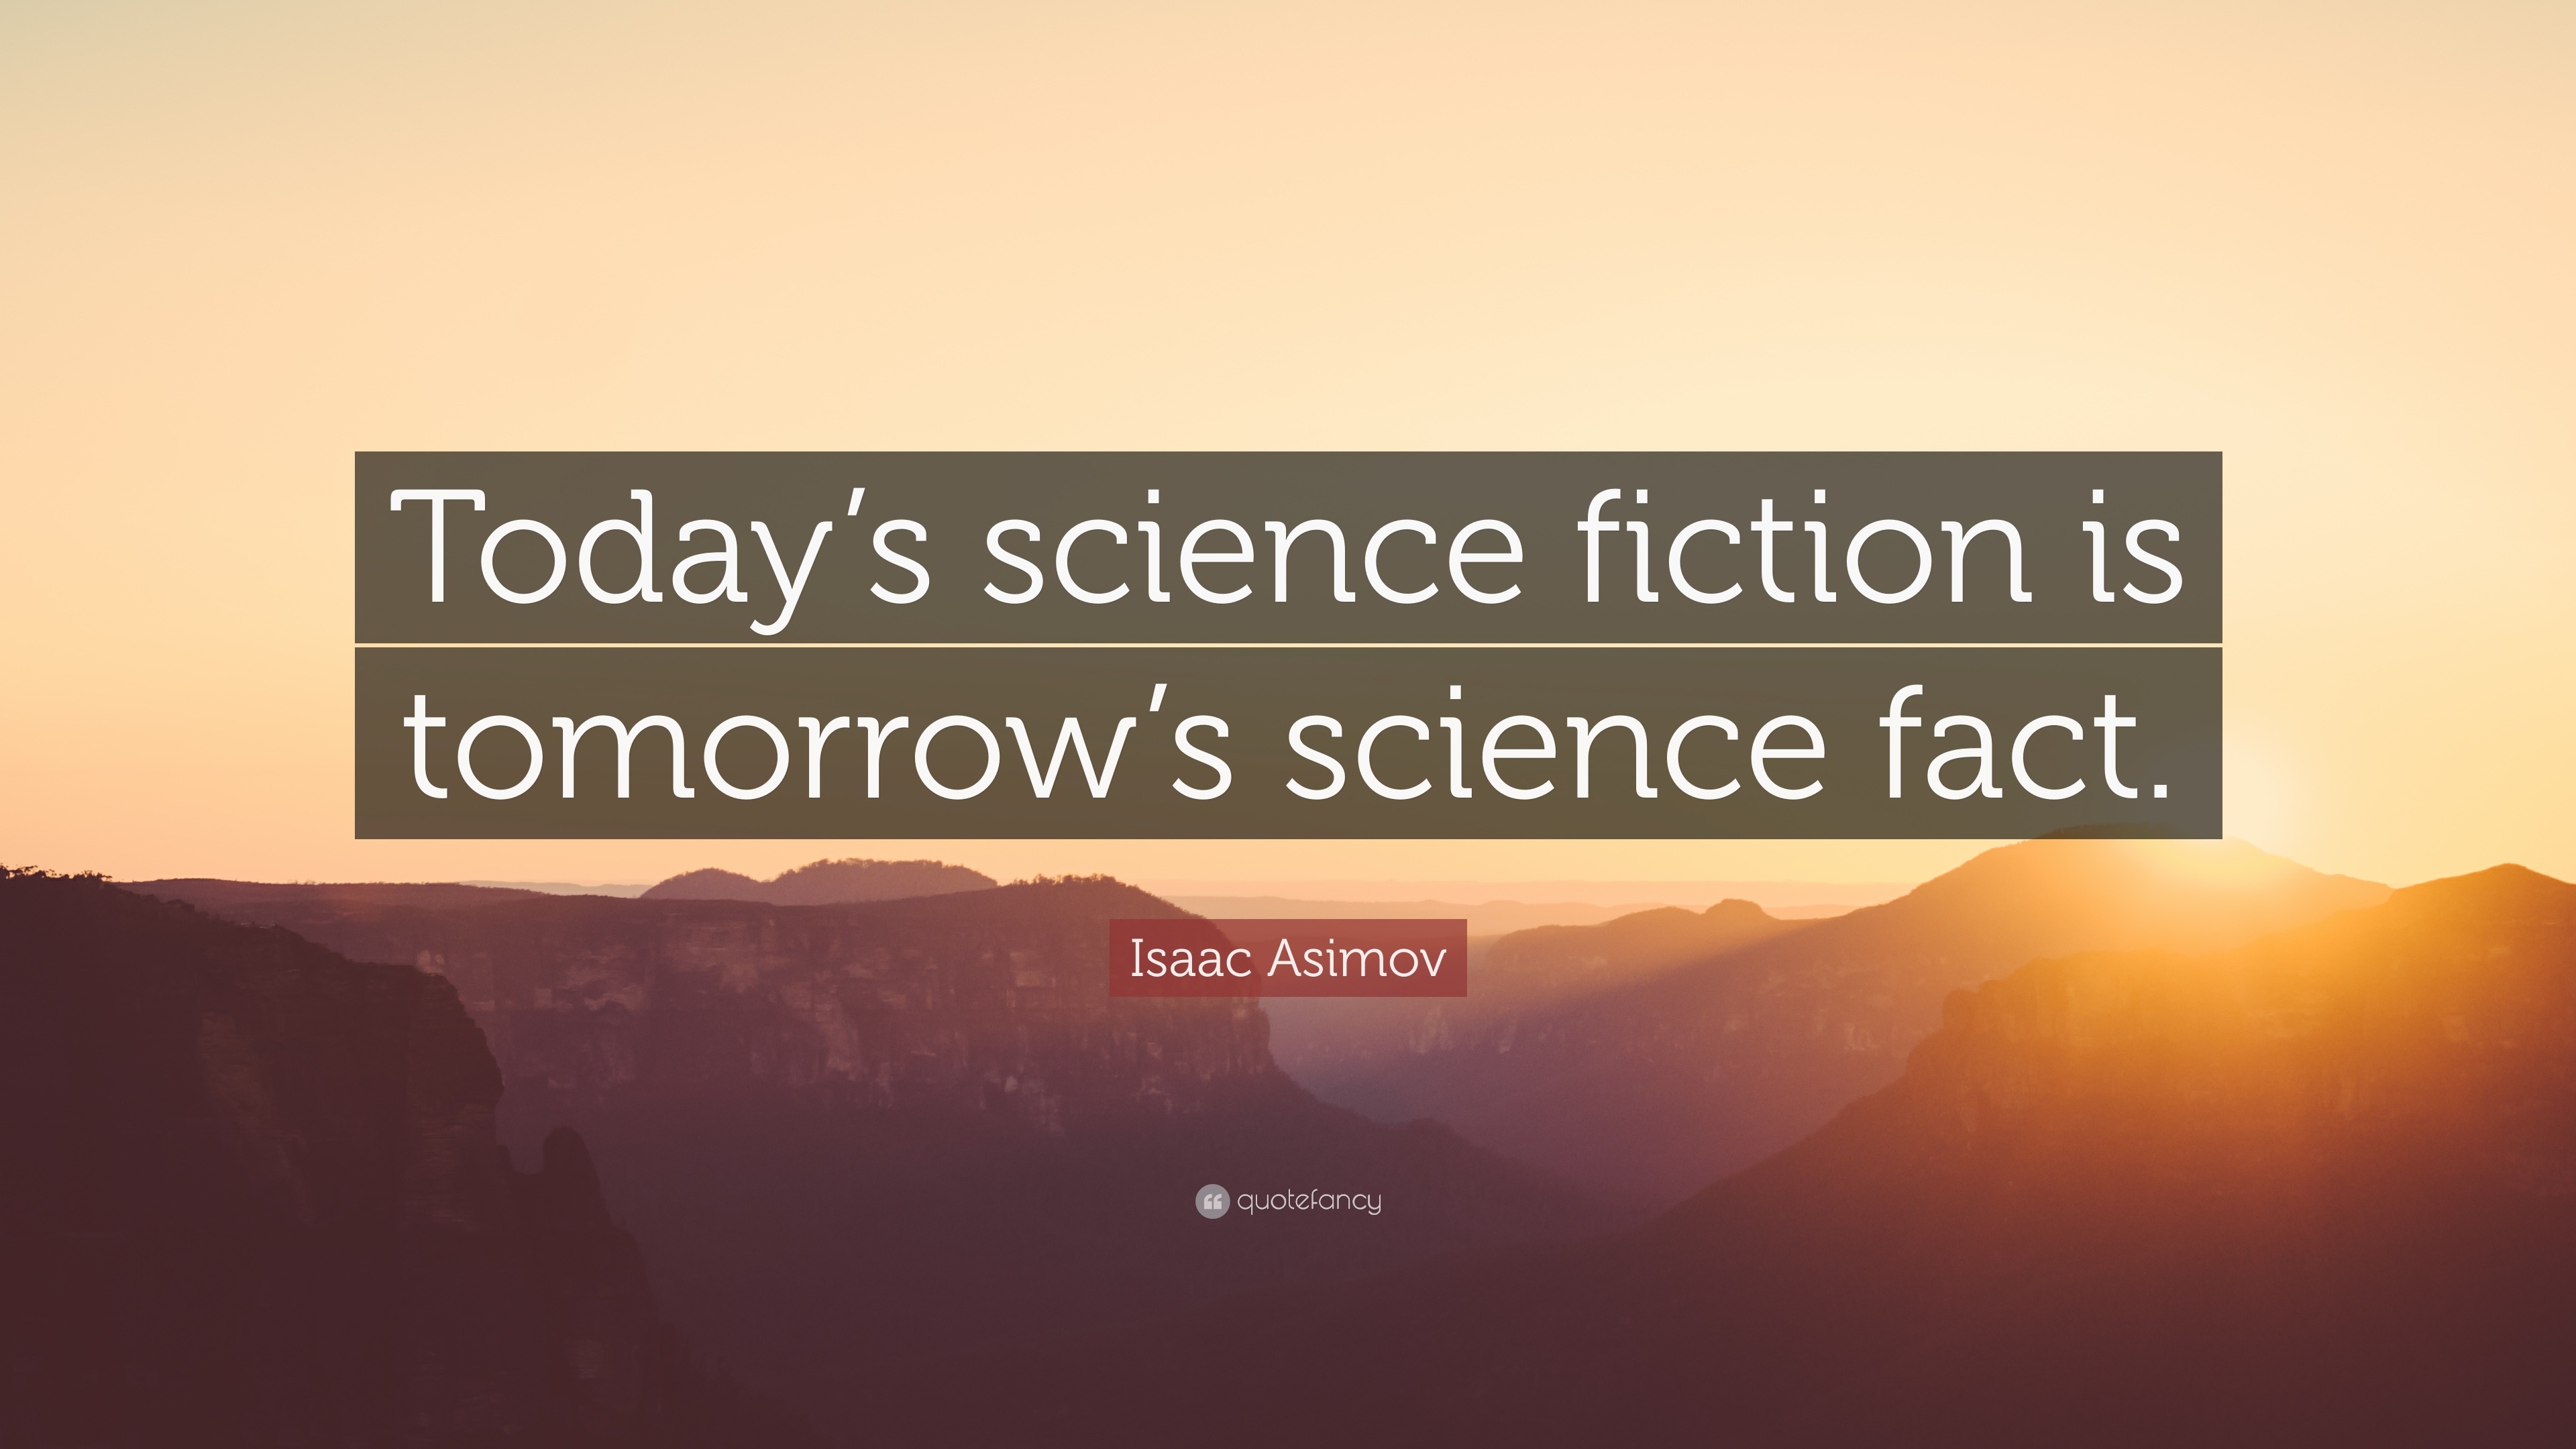 Isaac Asimov Quotes (100 wallpapers) - Quotefancy